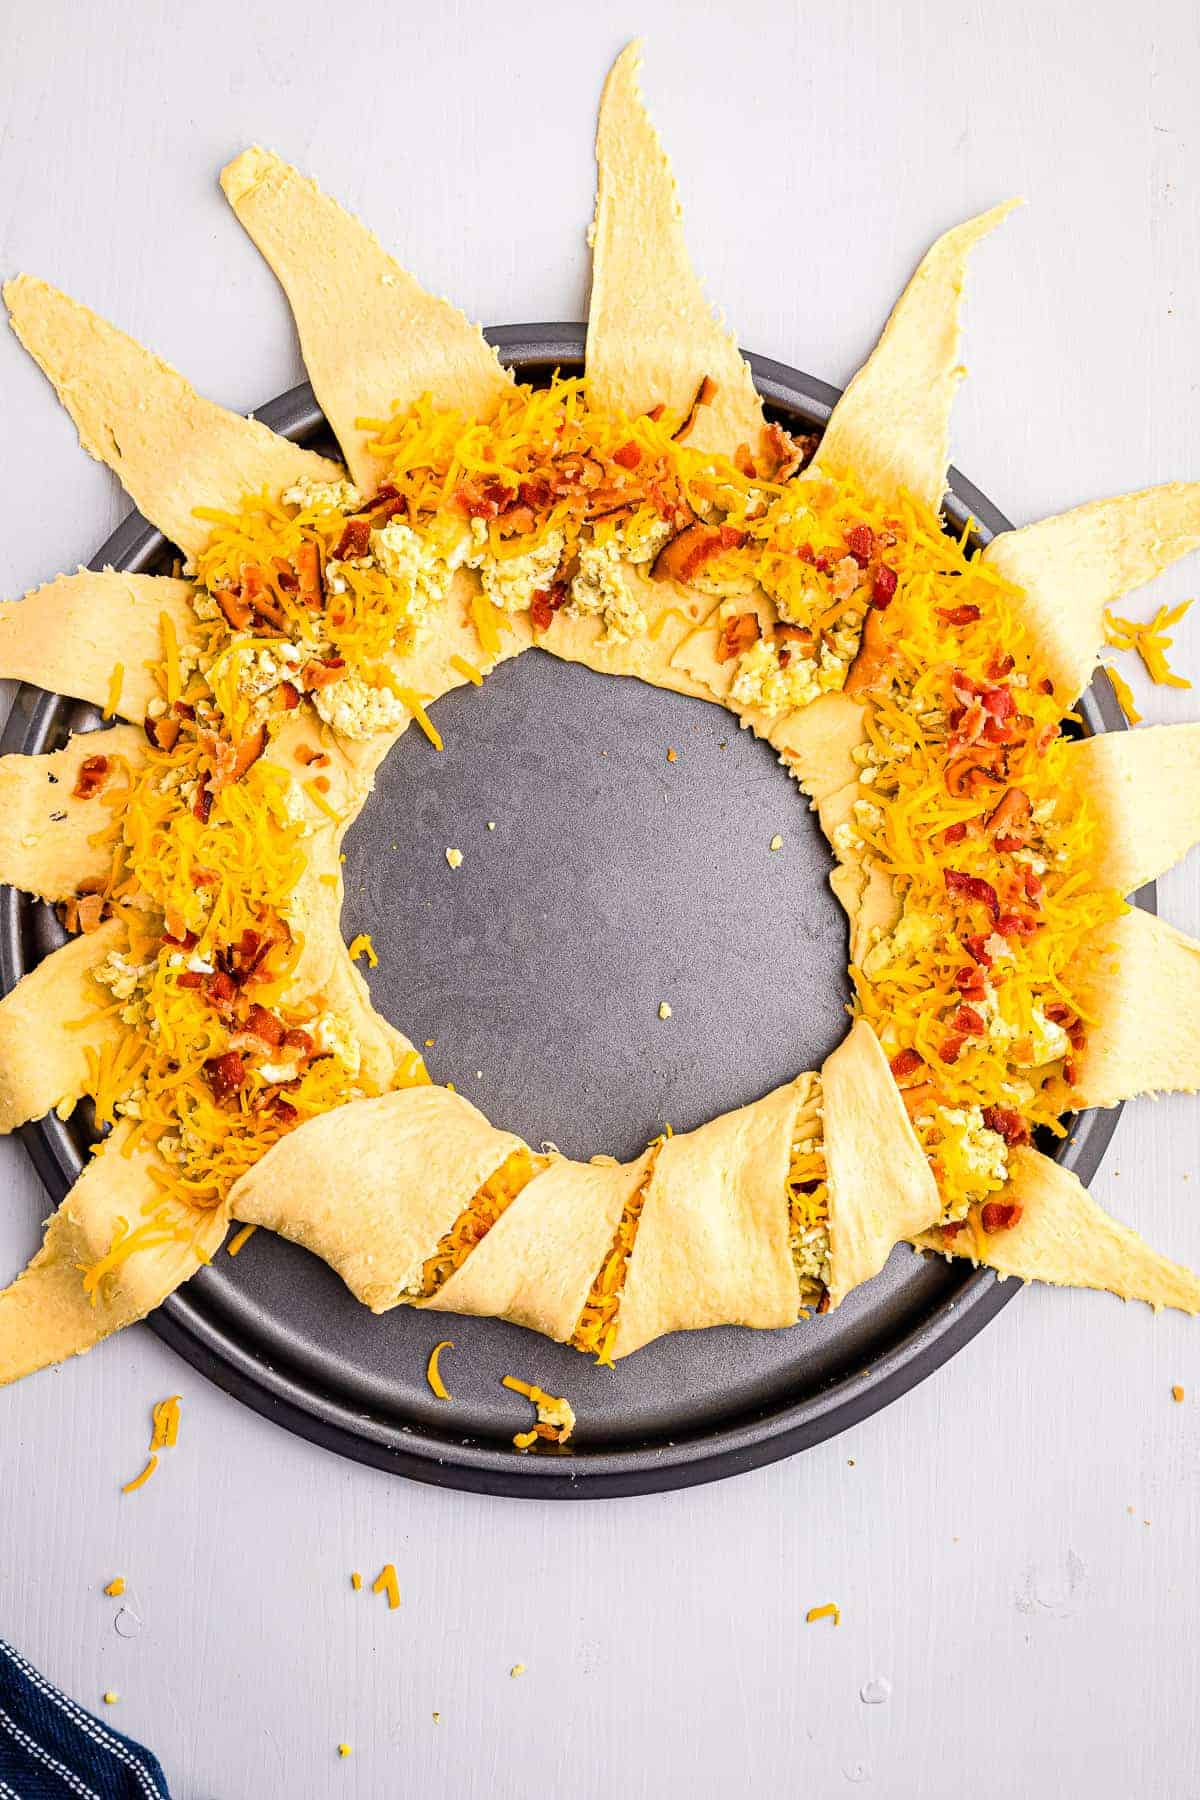 Crescent ring that is filled with cheese, eggs and bacon with a few slices folded over.